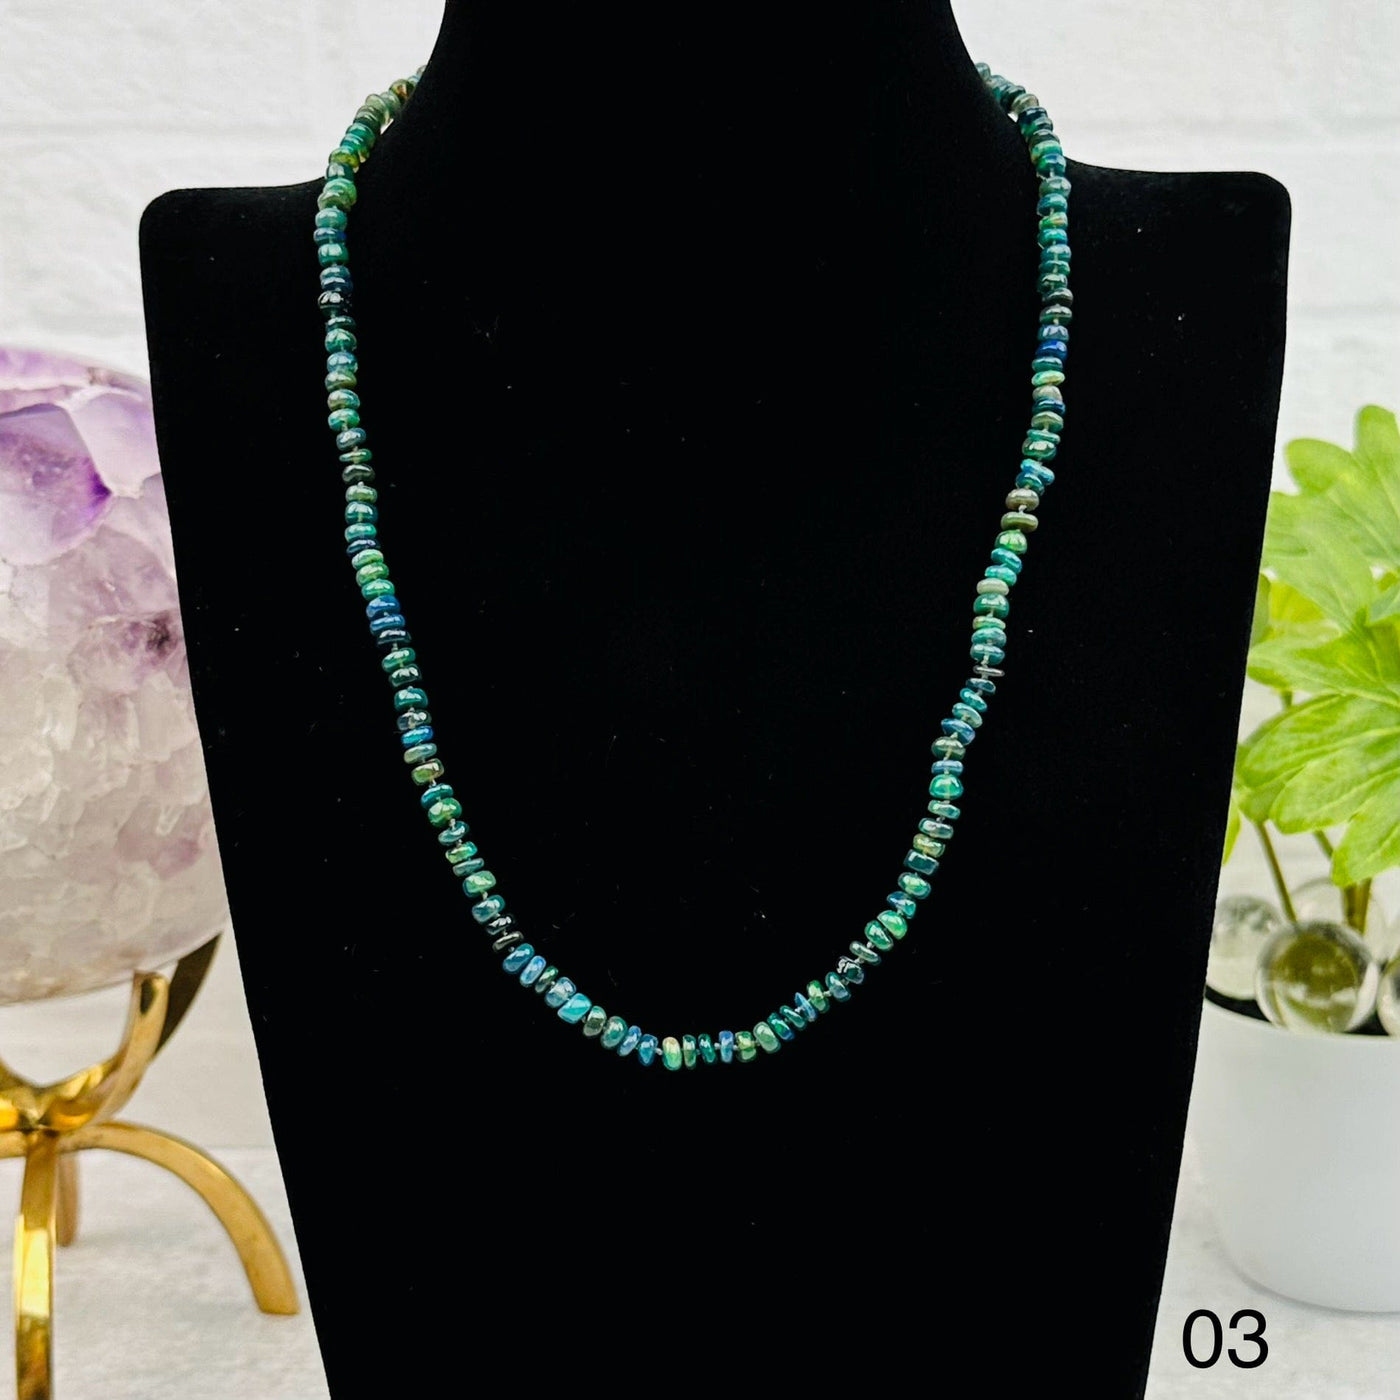 option 03 is for this dark green necklace 